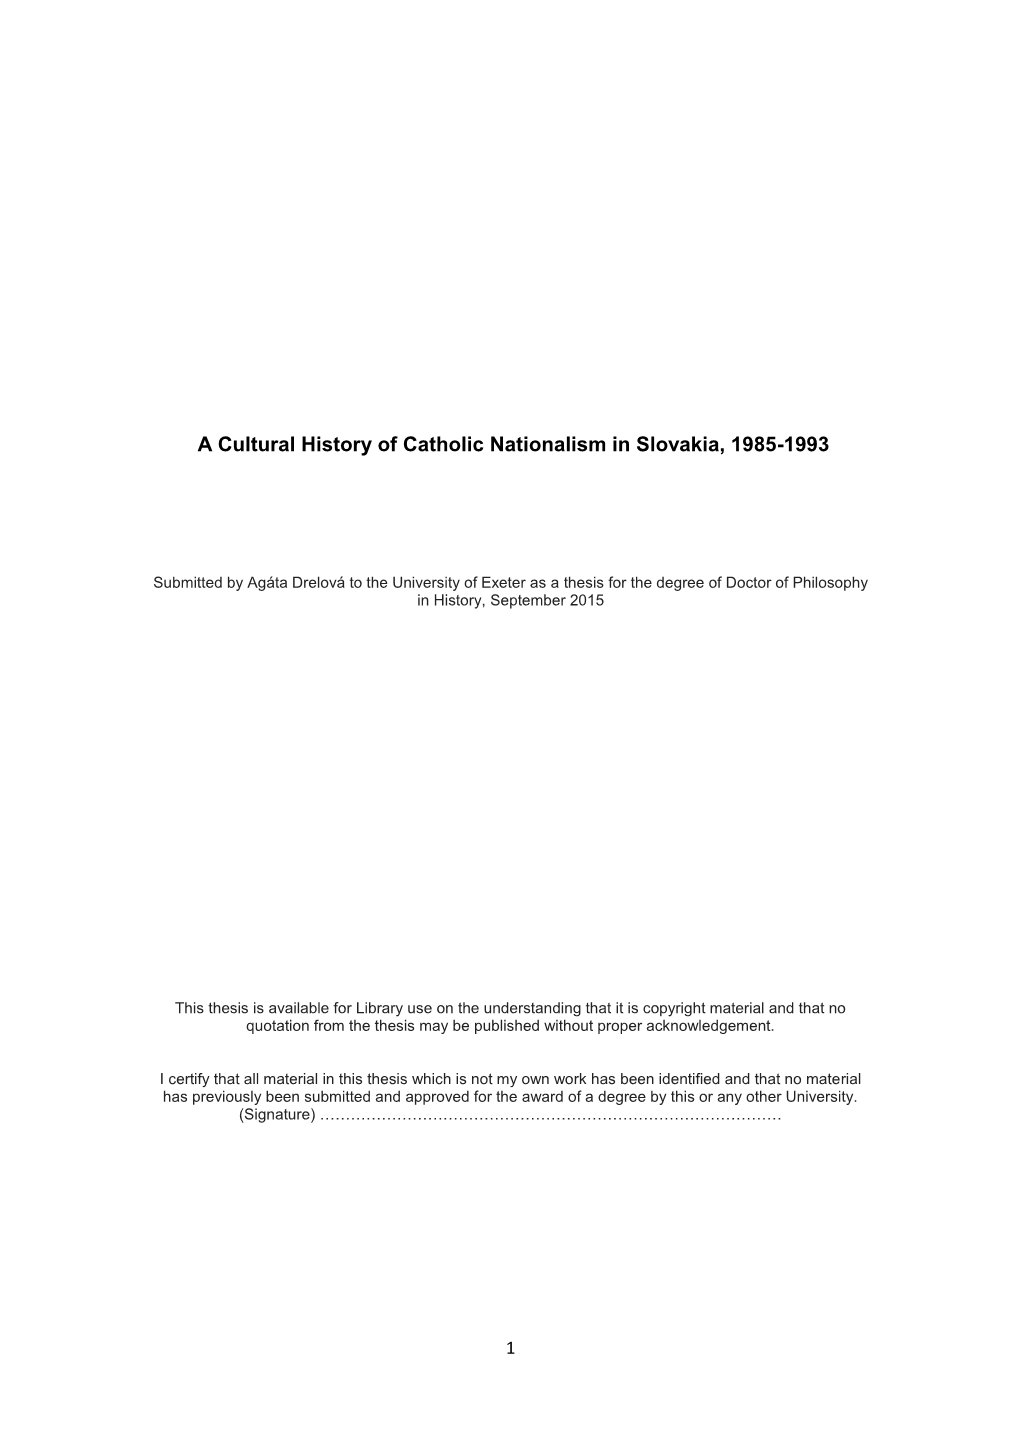 A Cultural History of Catholic Nationalism in Slovakia, 1985-1993